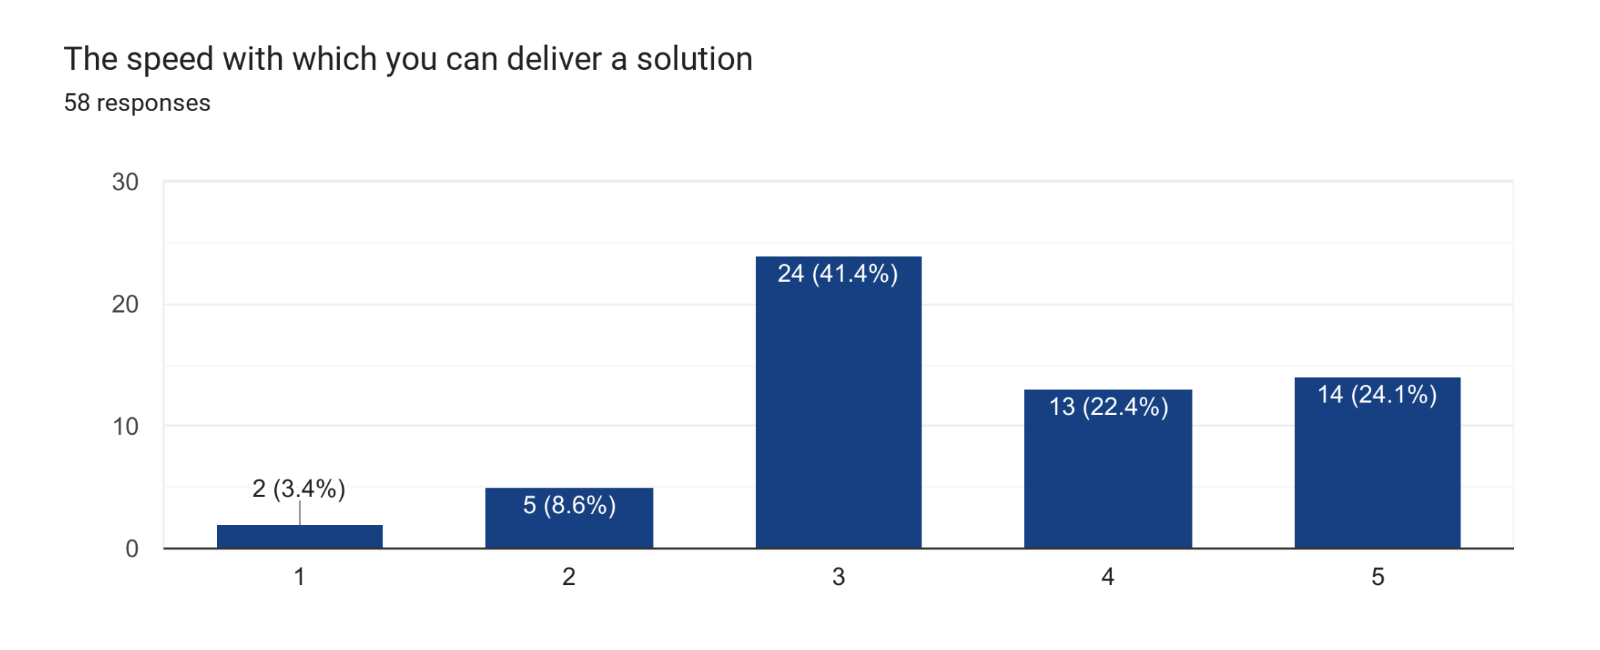 Bar graph titled “The speed with which you can deliver a solution” showing 58 responses on a scale of 1 to 5